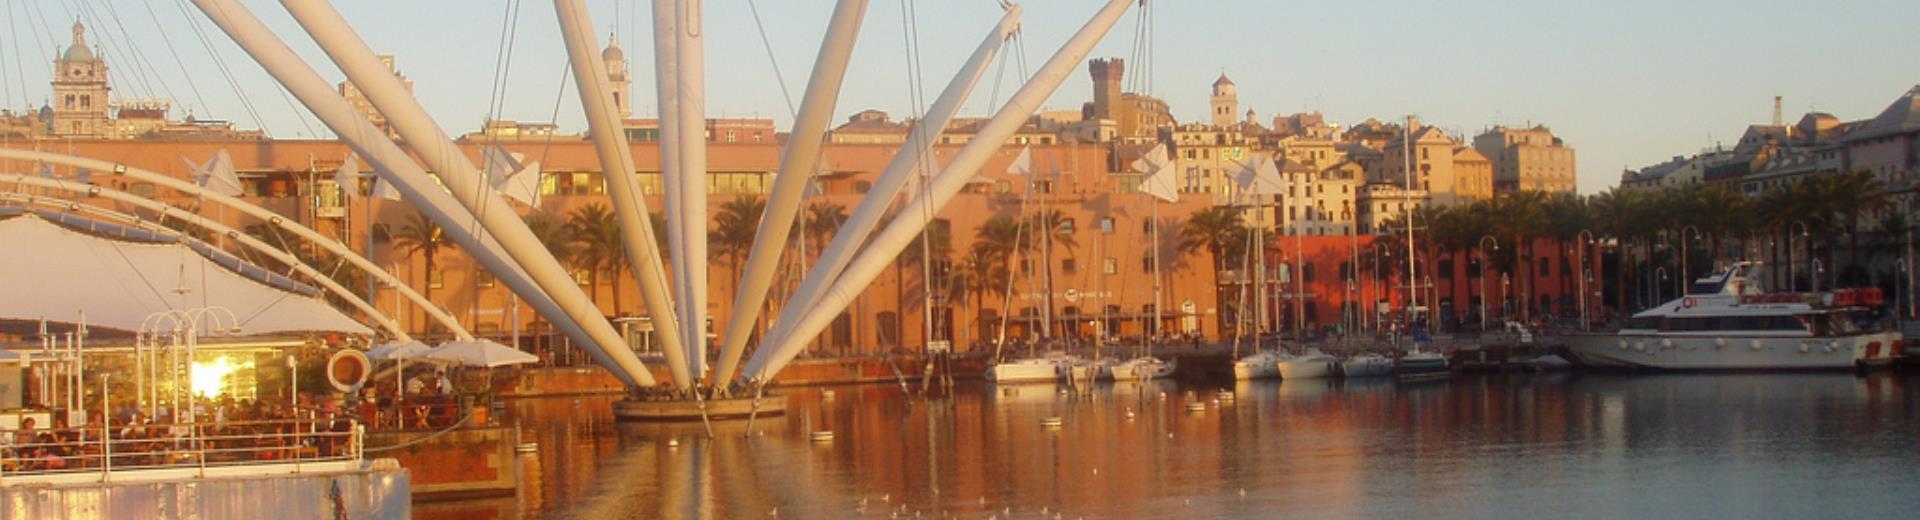 Discover the events happening at the Porto Antico Genoa Convention Centre and Cotton Warehouses. Hotel Porto Antico di Genova is just 50 metres from the old port.